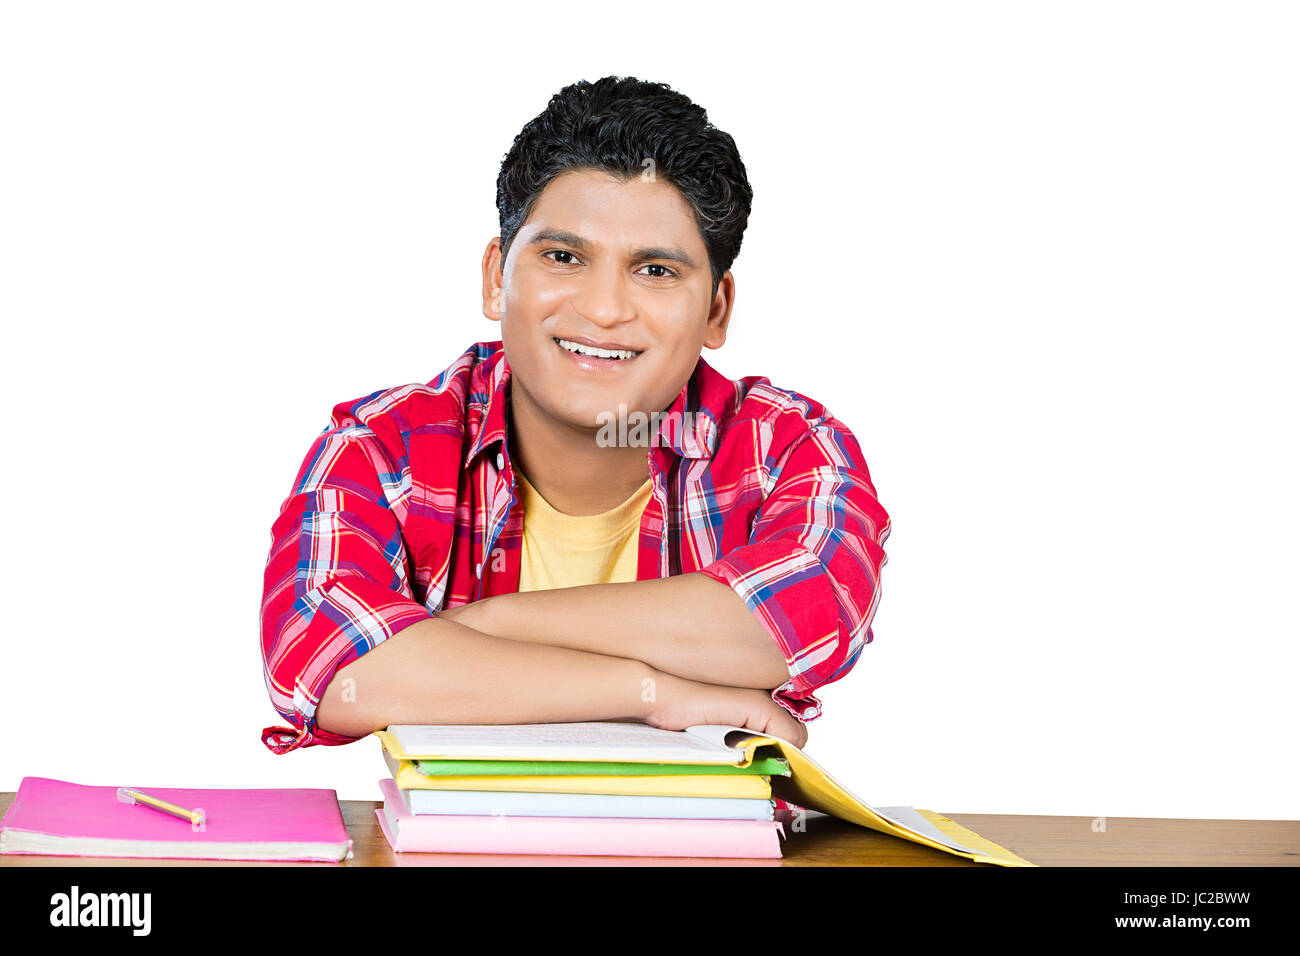 College Young Man student Book Study Exam Preparation Stock Photo